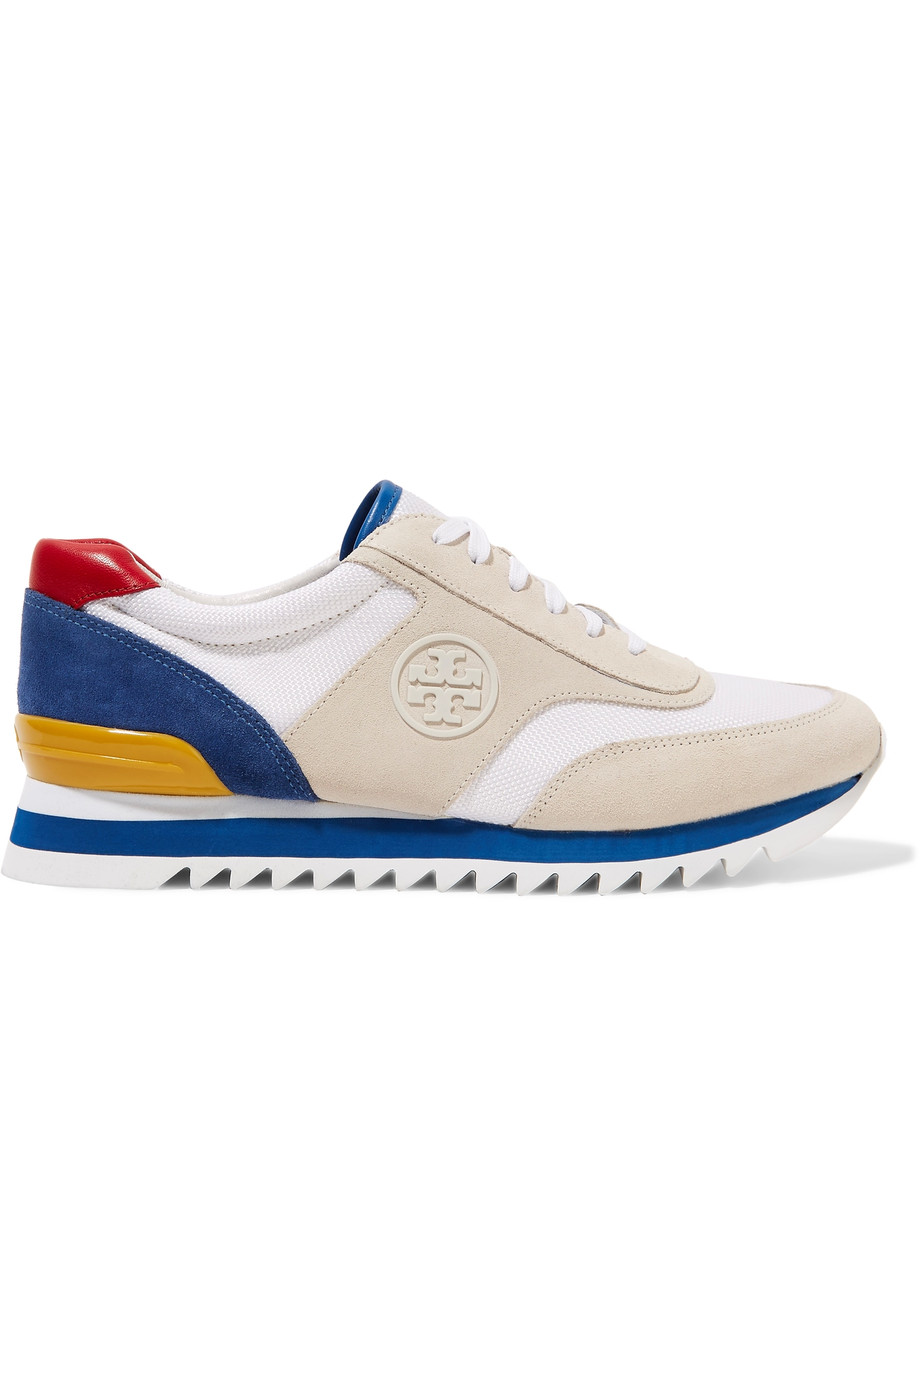 tory burch canvas sneakers